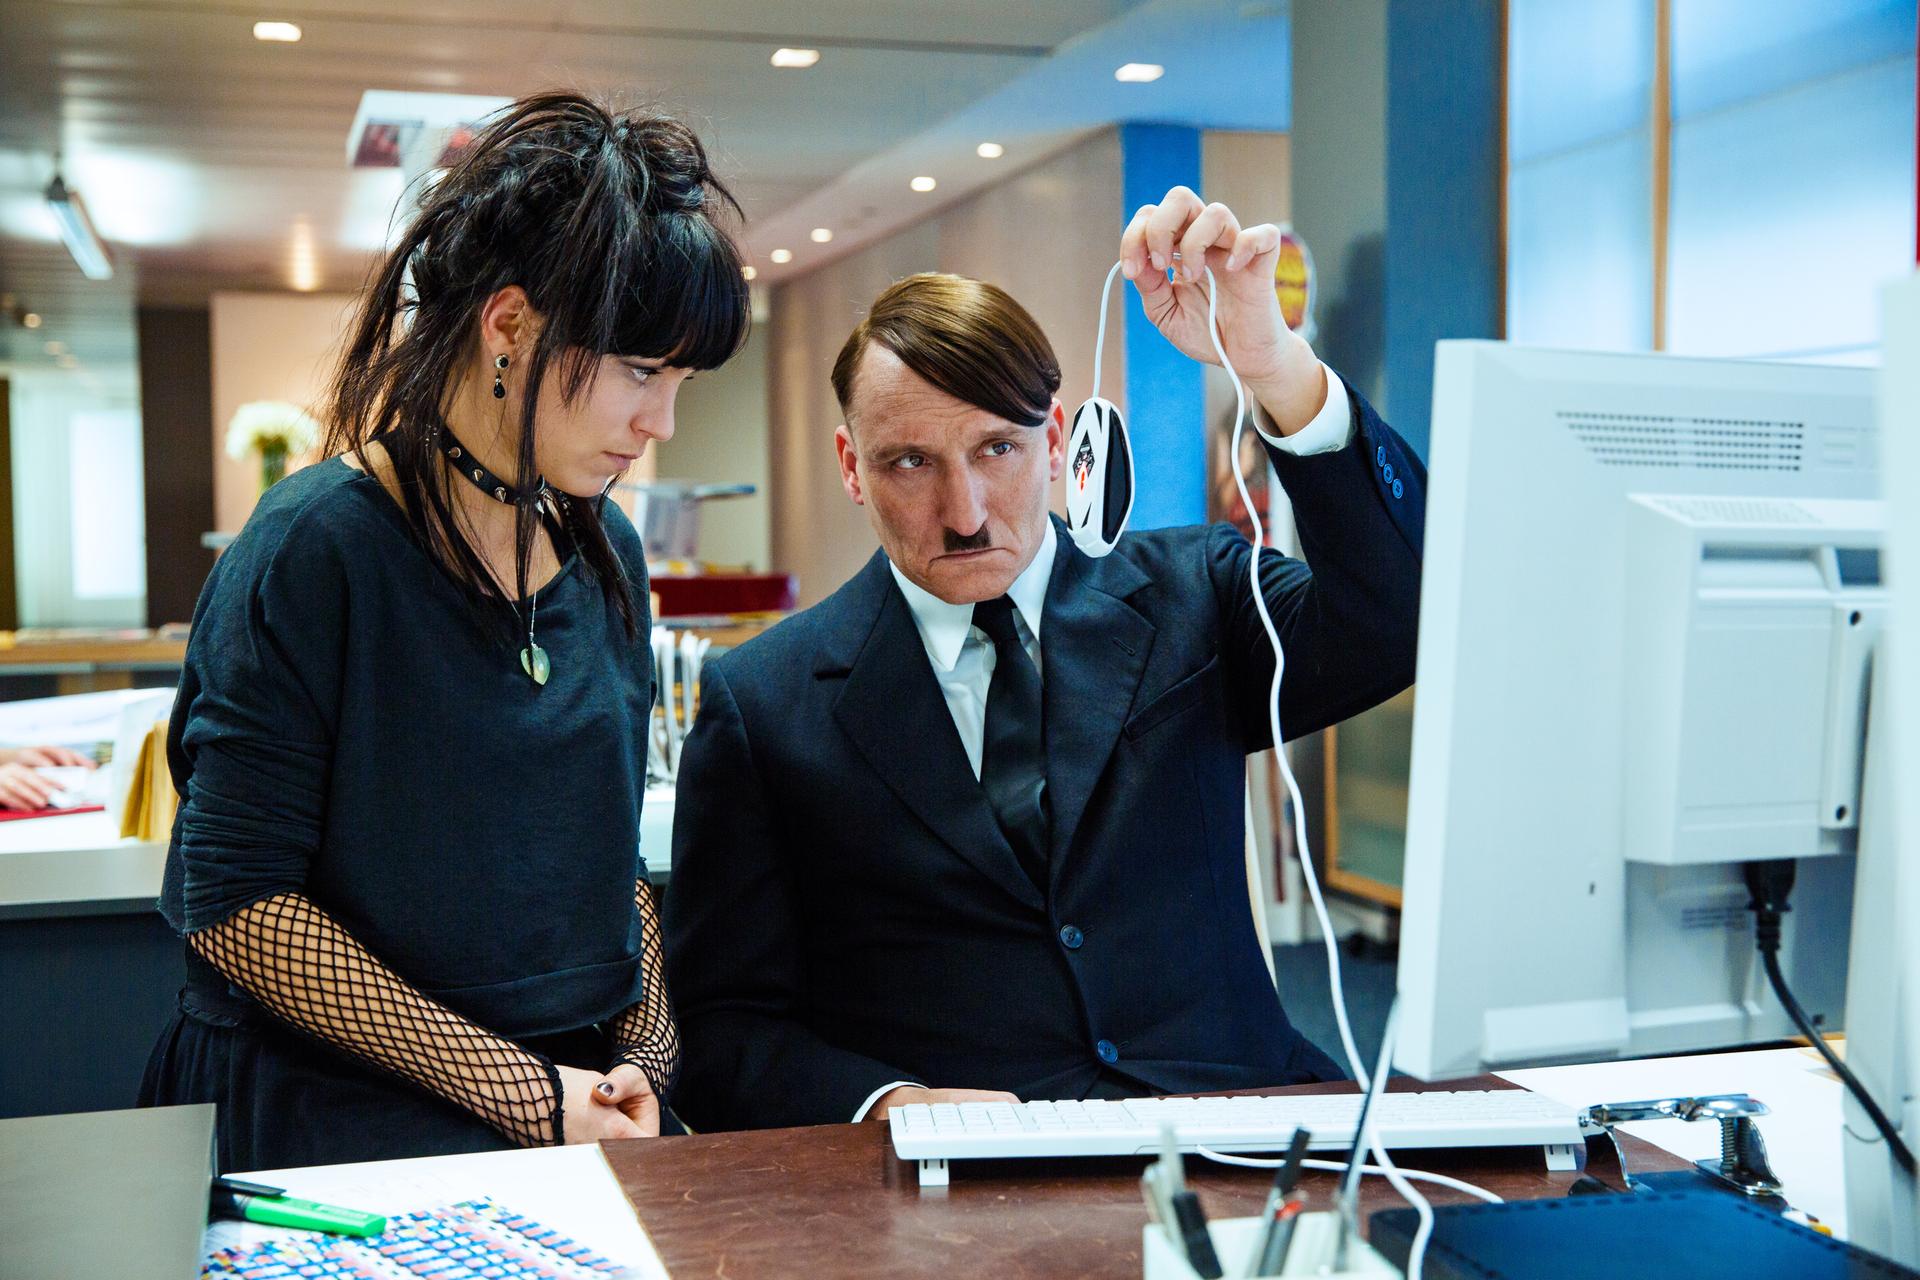 Hitler trying to learn how to use a computer and mouse